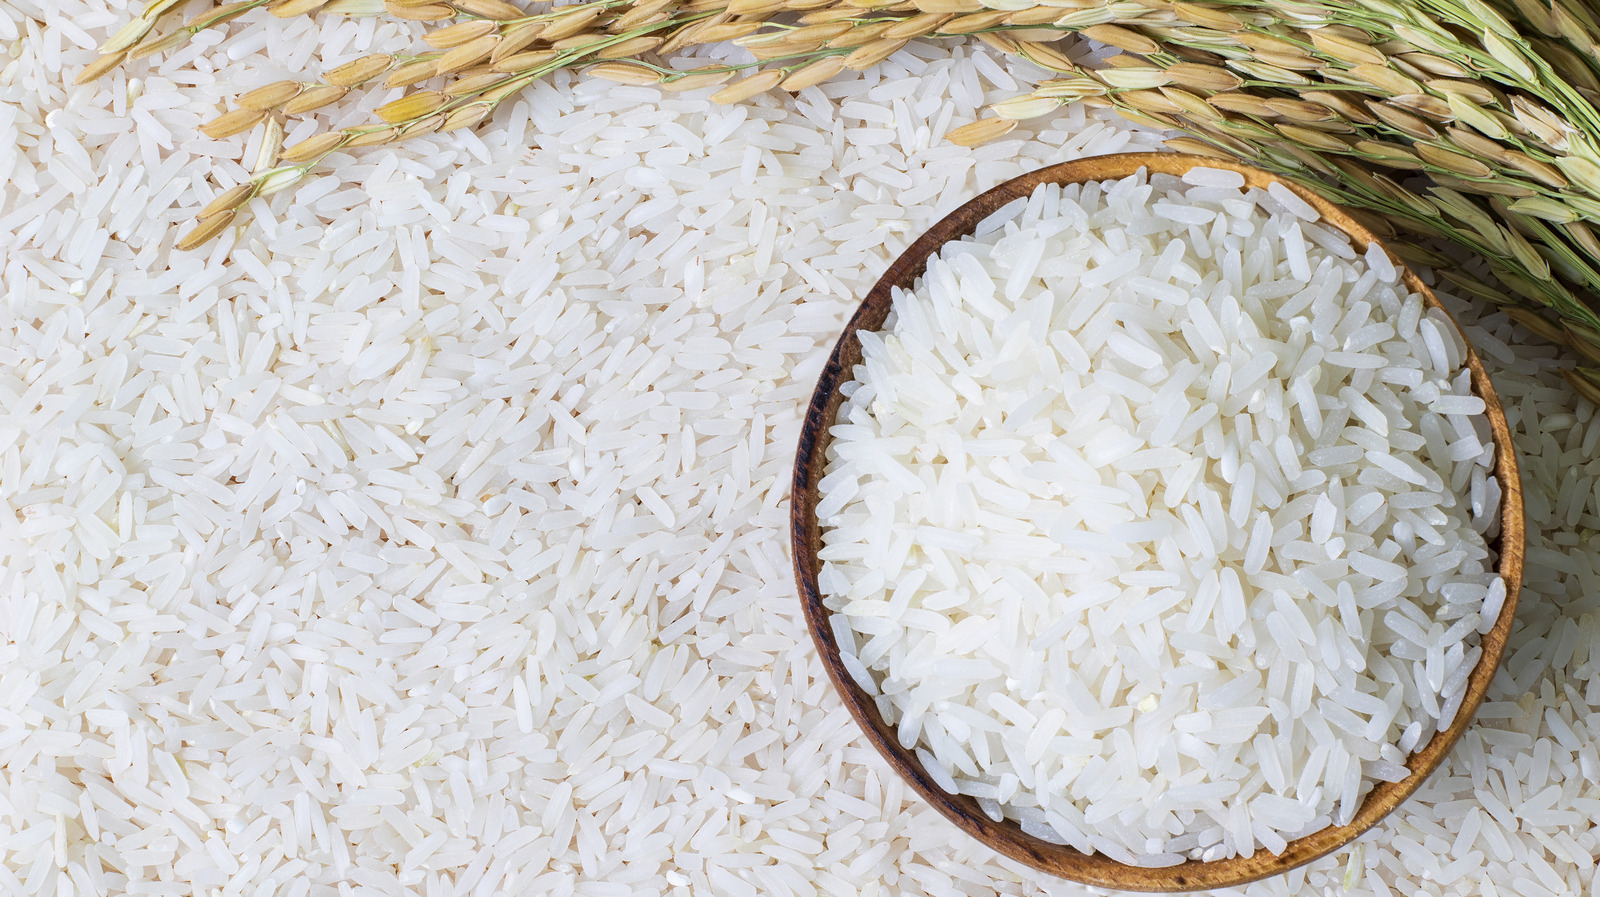 Enriched Rice Vs. Regular: What's The Difference?